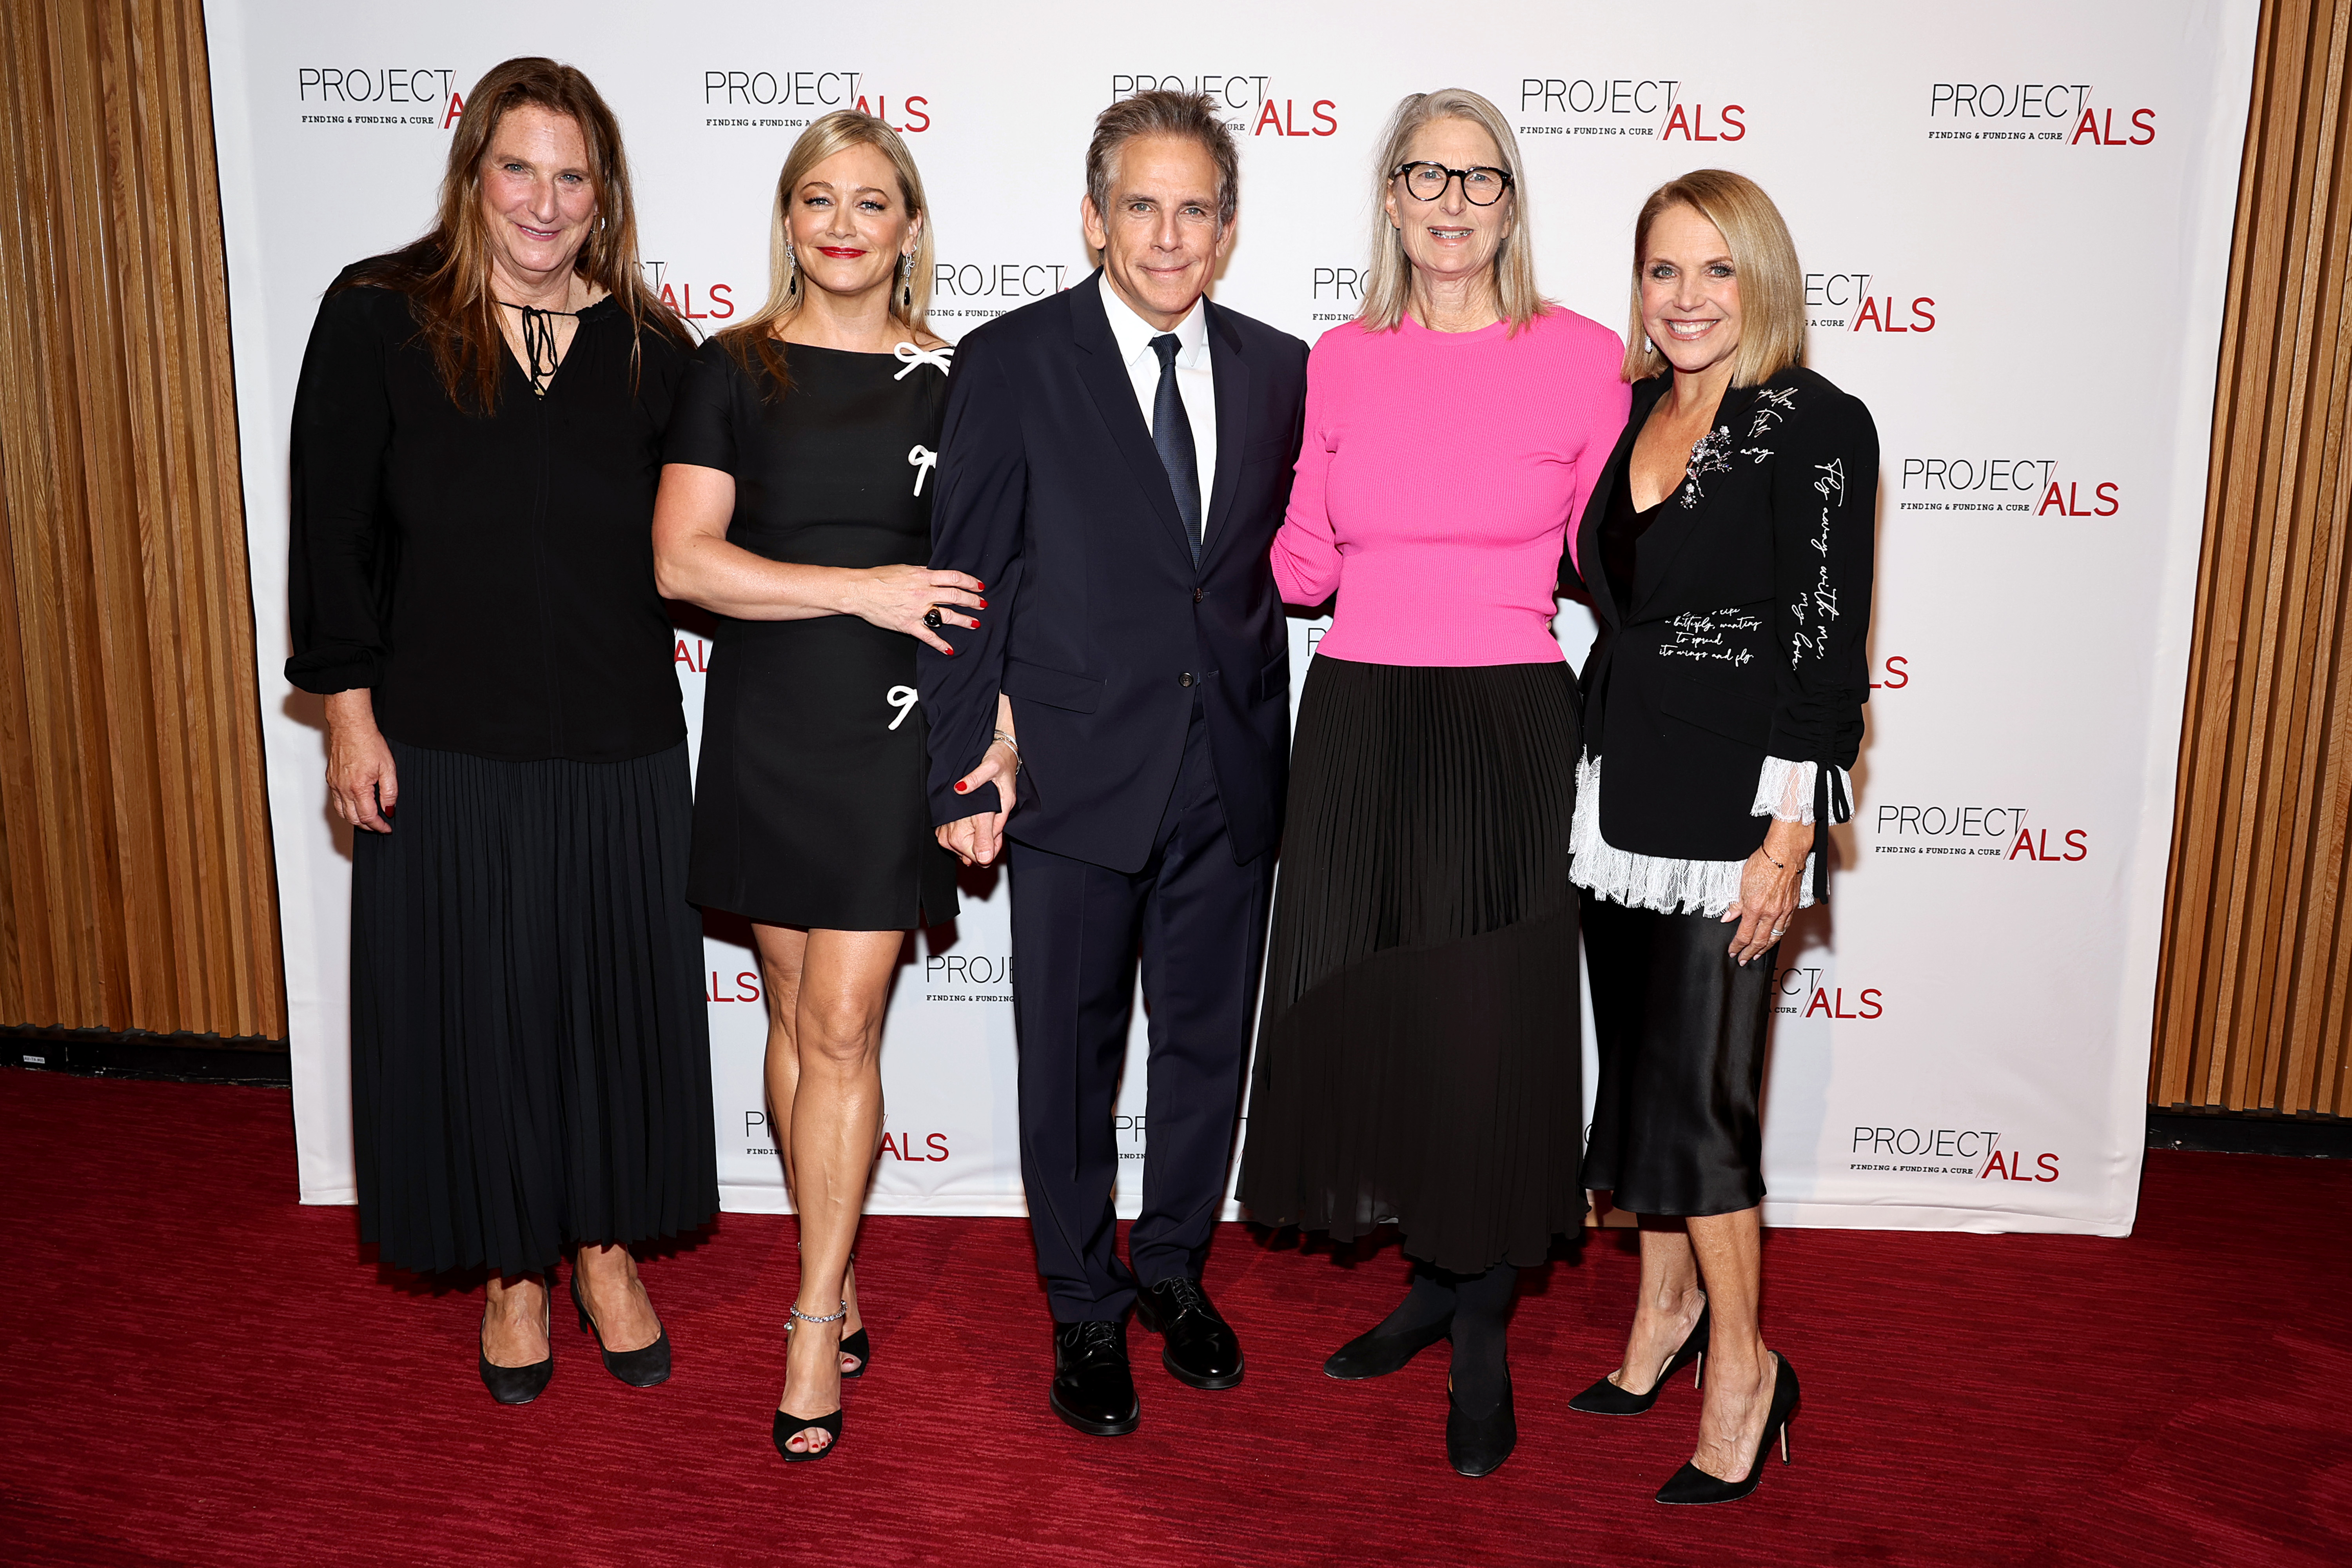 Meredith Estess, Christine Taylor, Ben Stiller, Valerie Estess, and Katie Couric at the Project ALS 25th Anniversary Gala at Jazz at Lincoln Center on October 26, 2023 in New York City. | Source: Getty Images